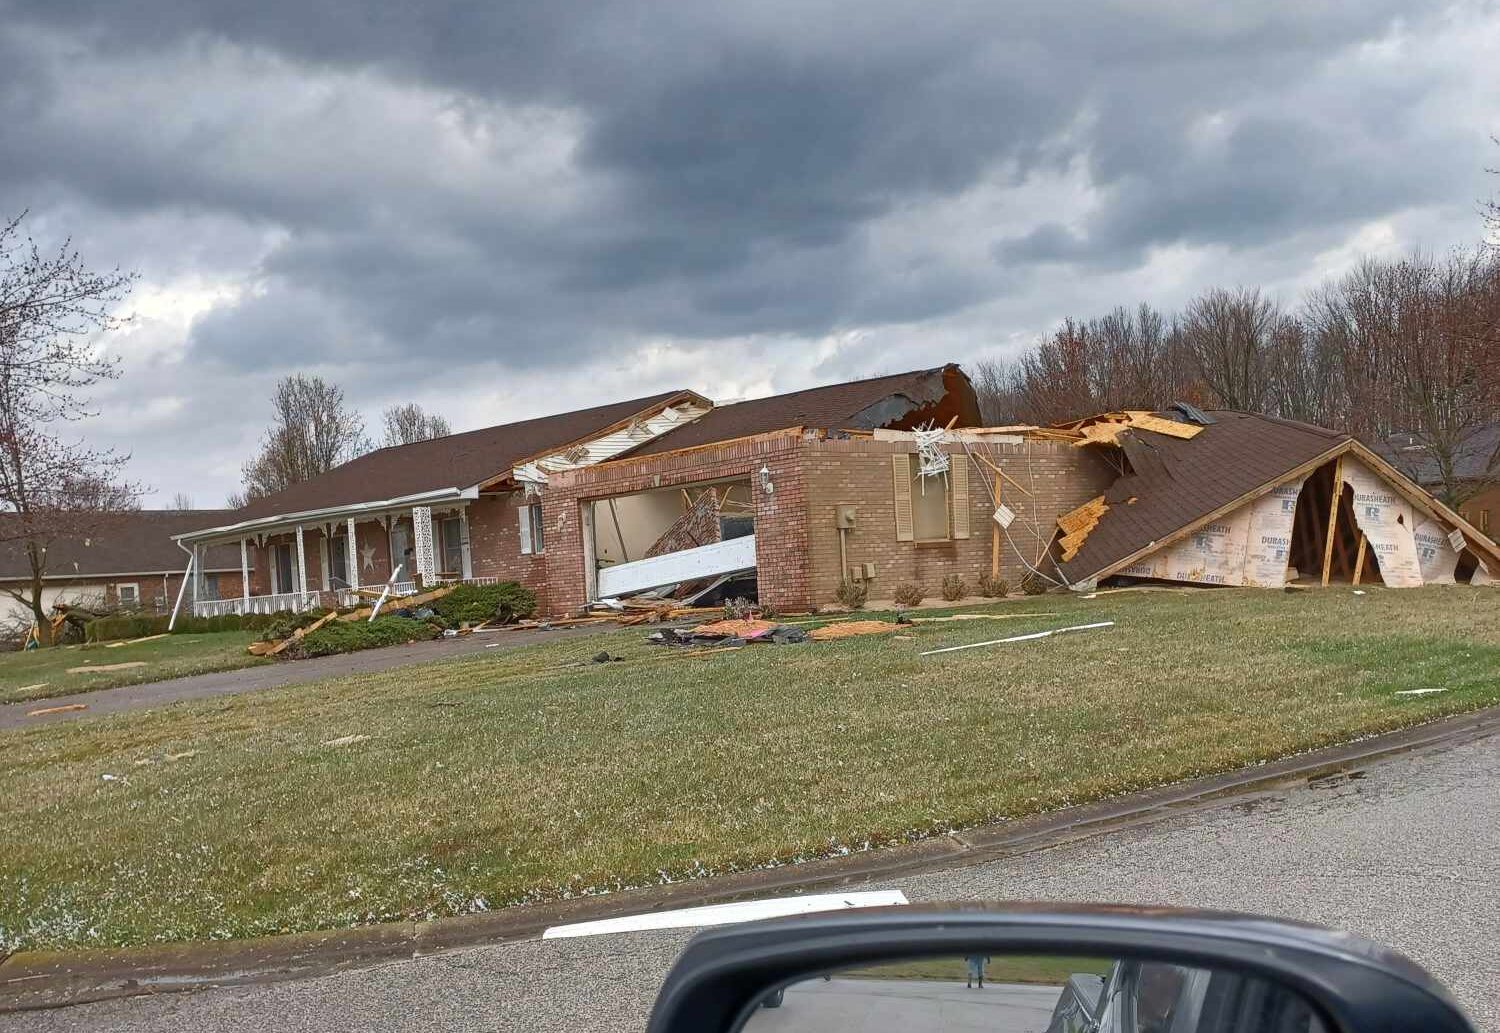 Tornados left a trail of damage in the Jefferson Manor subdivision near Hanover, Indiana on March 14.